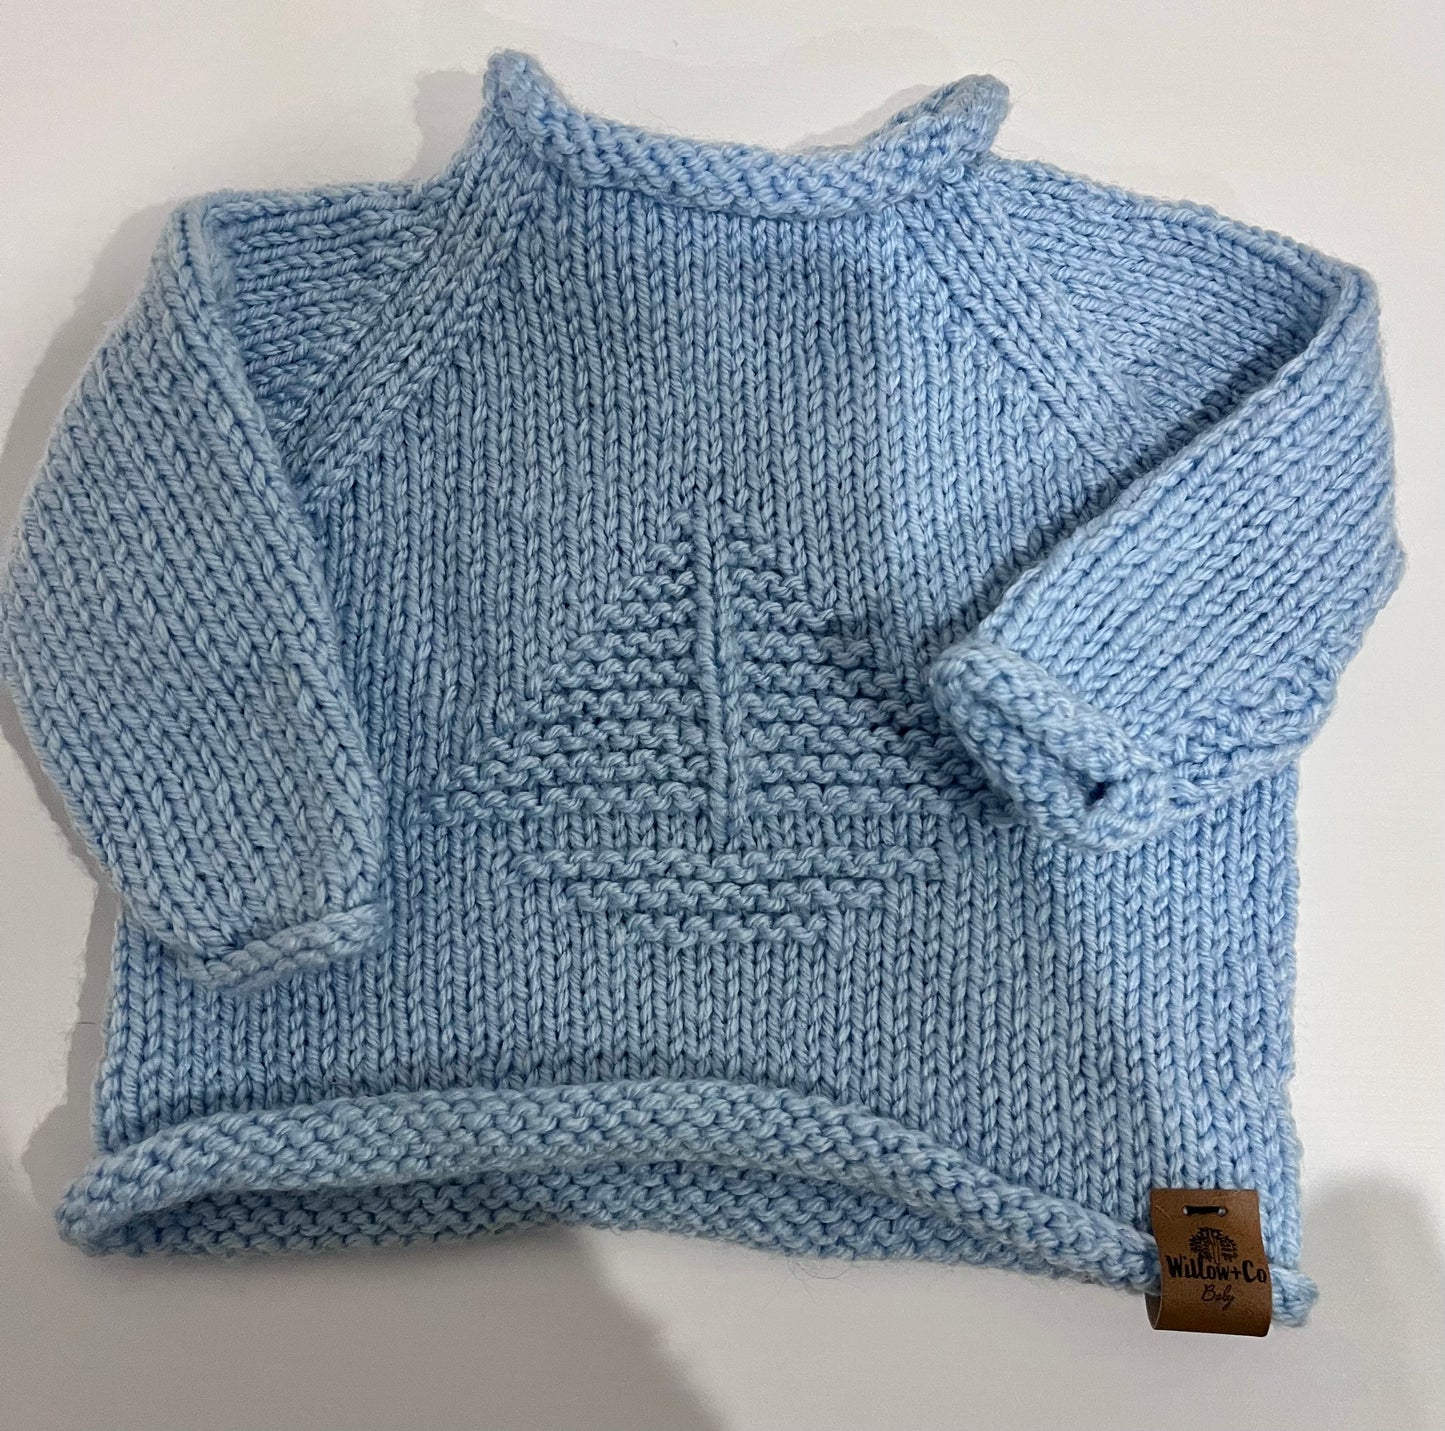 HAND KNITTED JUMPER WITH SAIL BOAT DETAIL - BABY BLUE